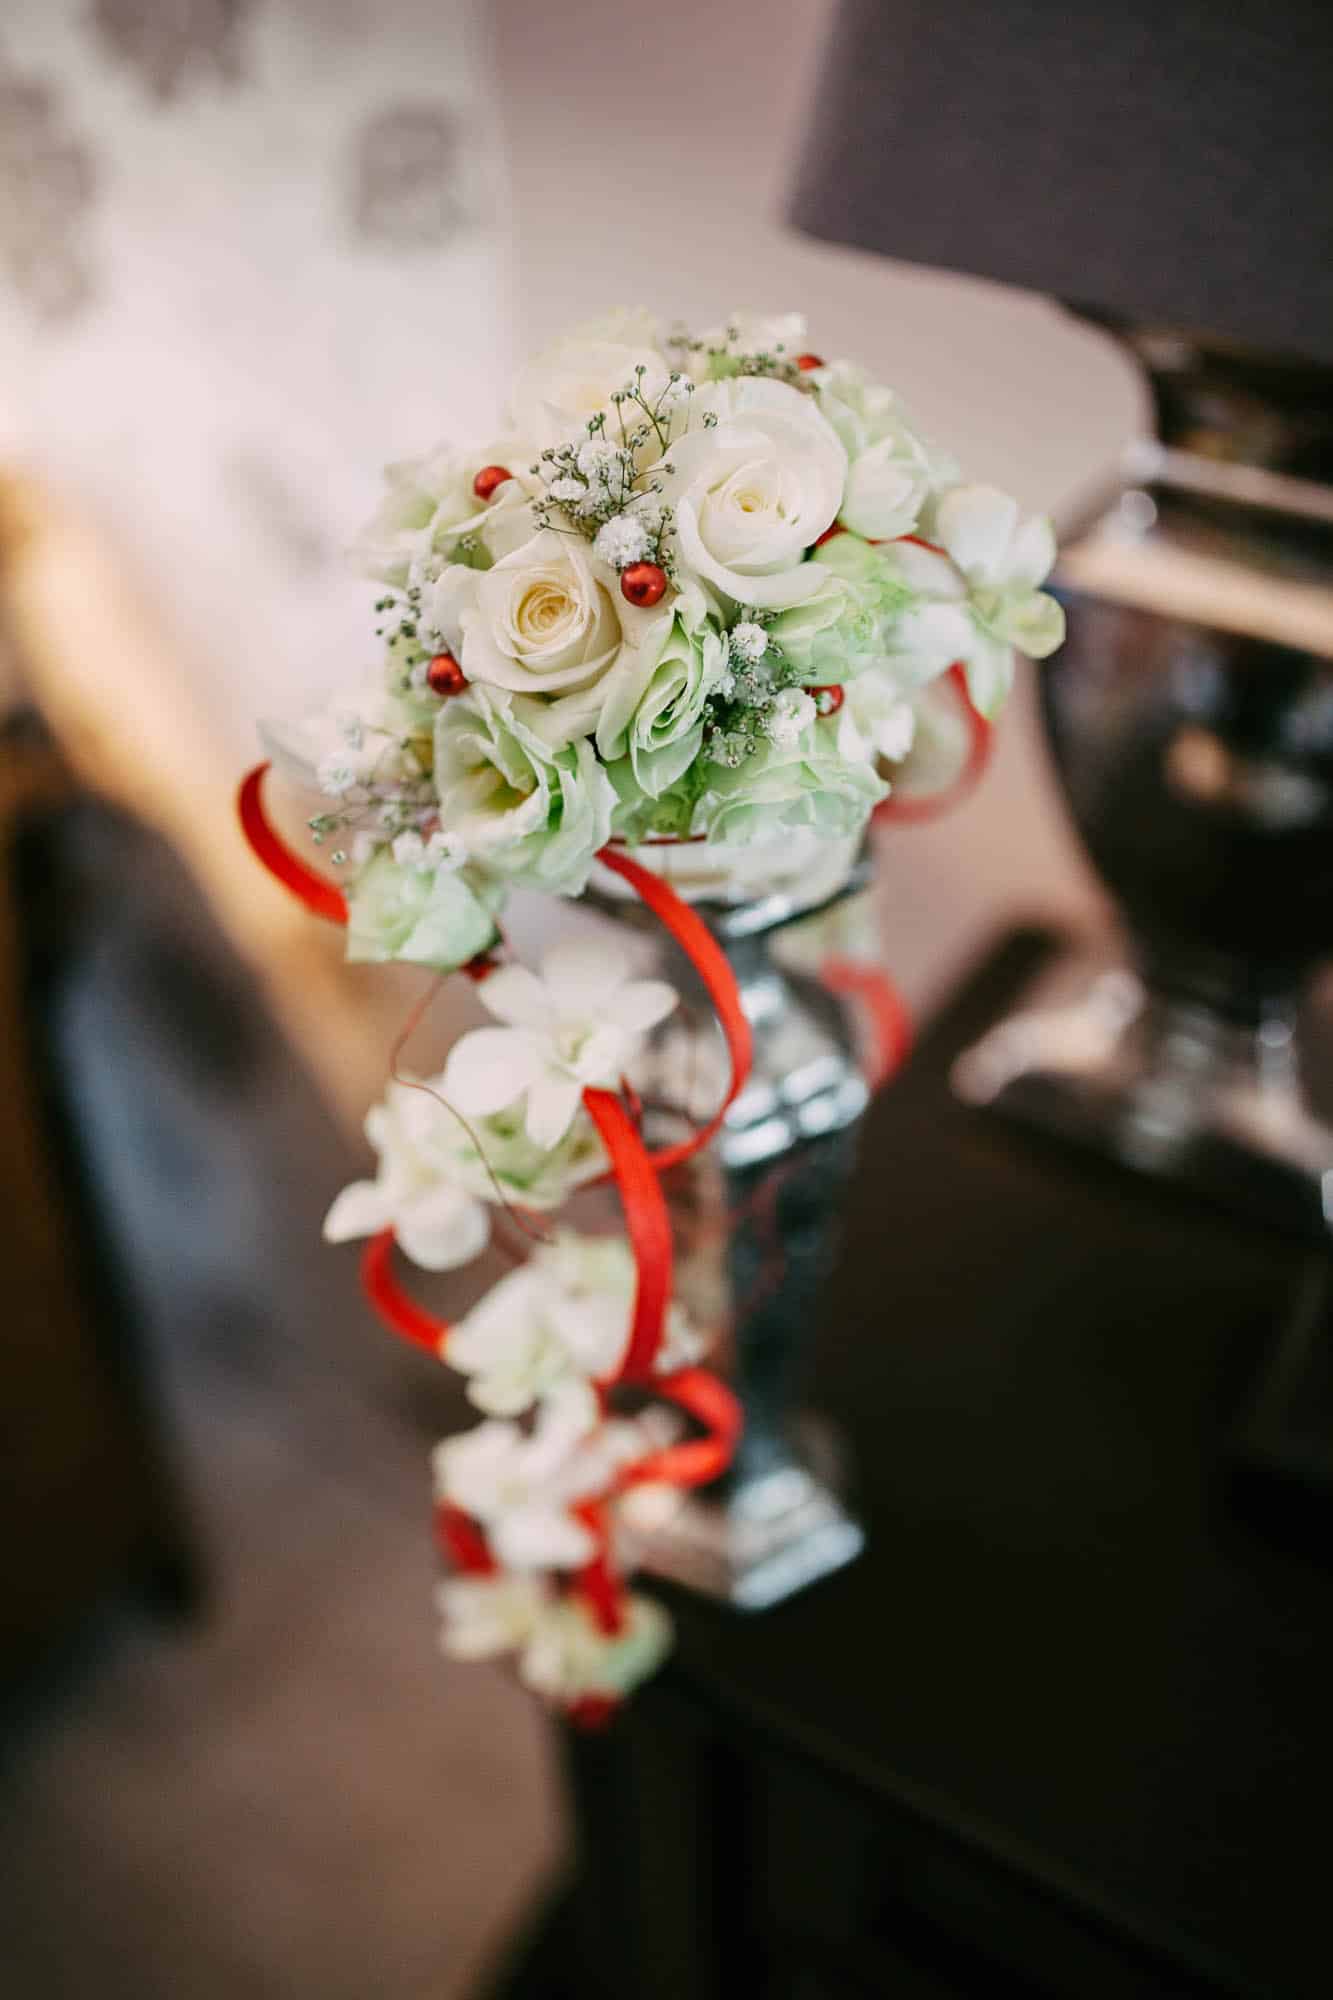 On a table is a white and red Wedding Bouquet.